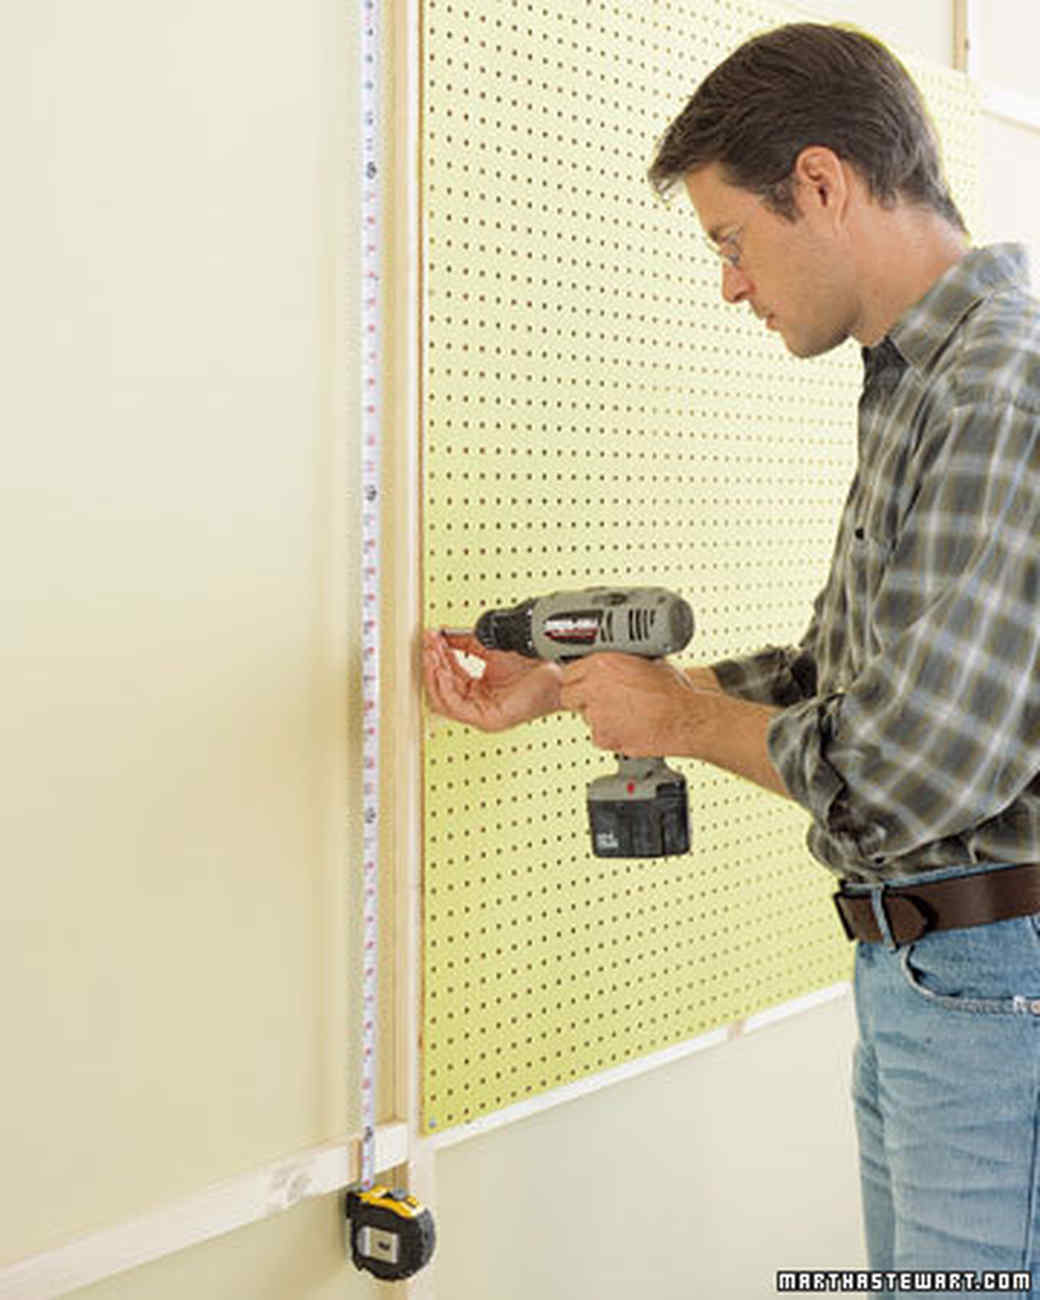 Install Pegboard, Install Pegboard In Garage, Install Pegboard on Concrete, Home Decor Ideas, Home Improvement Ideas, Home Decor DIY